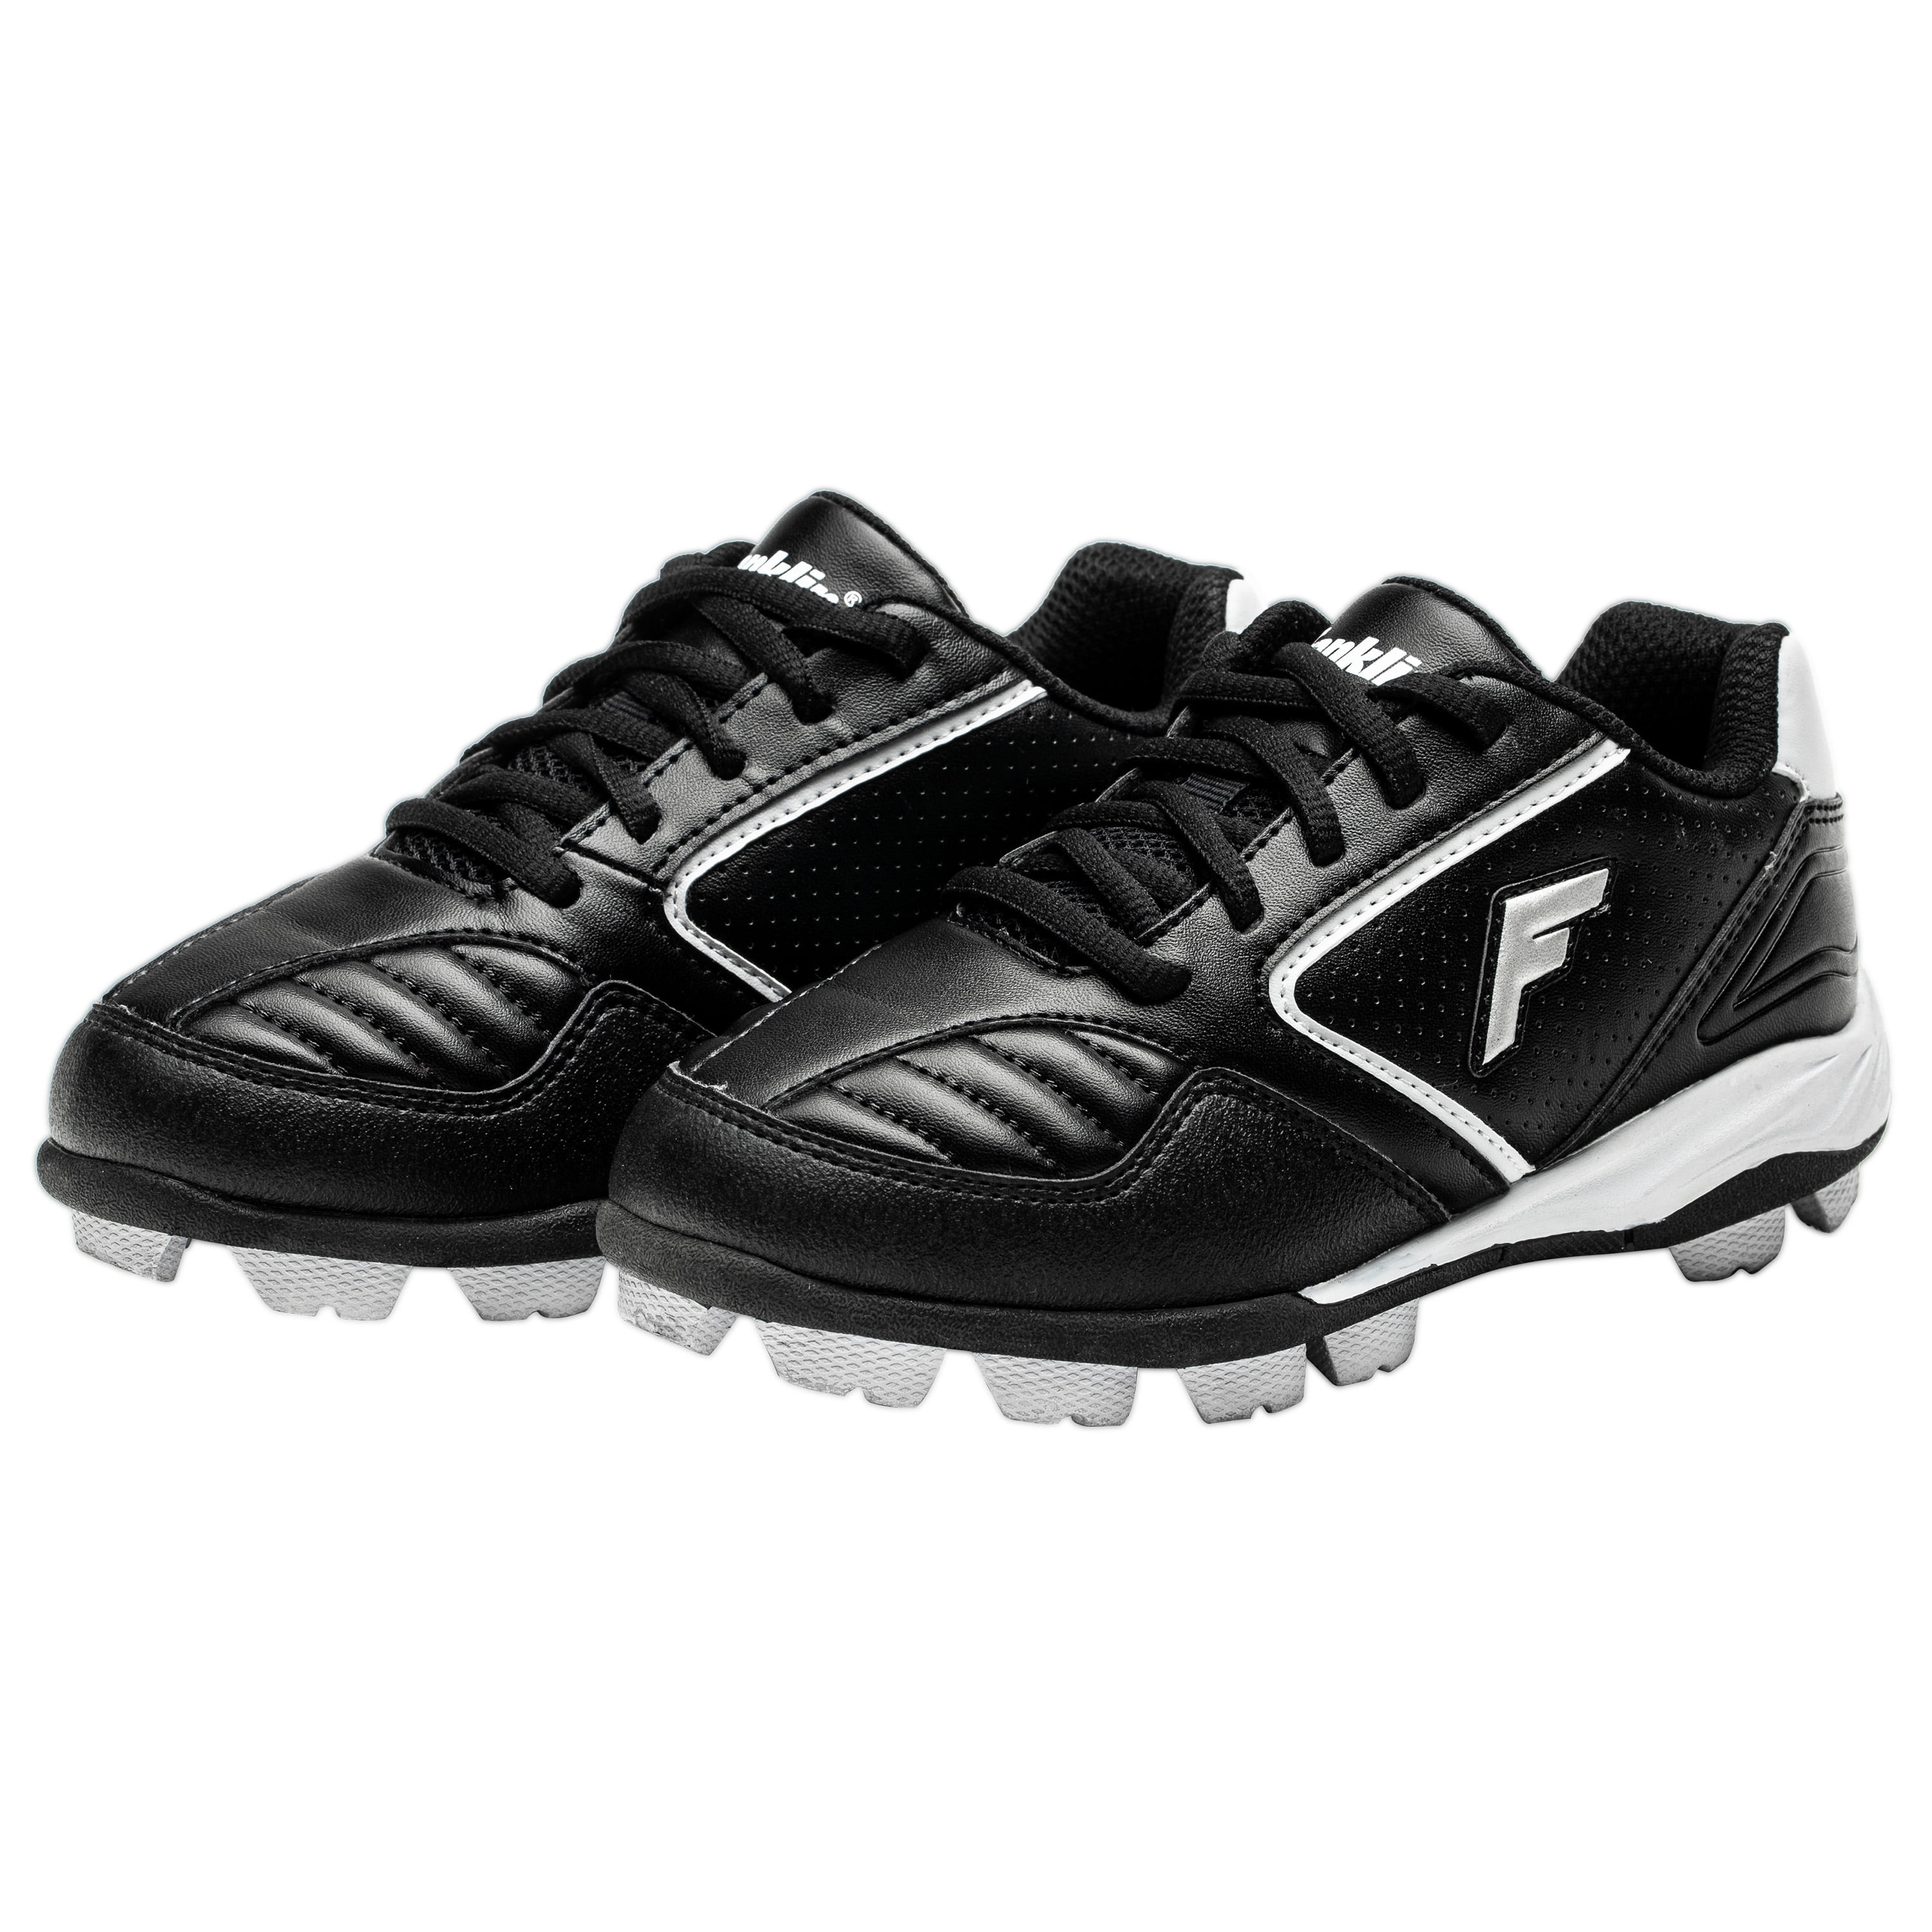 Details about   Franklin Tournament Baseball Cleats Childrens Kids Boys Youth Size 12 